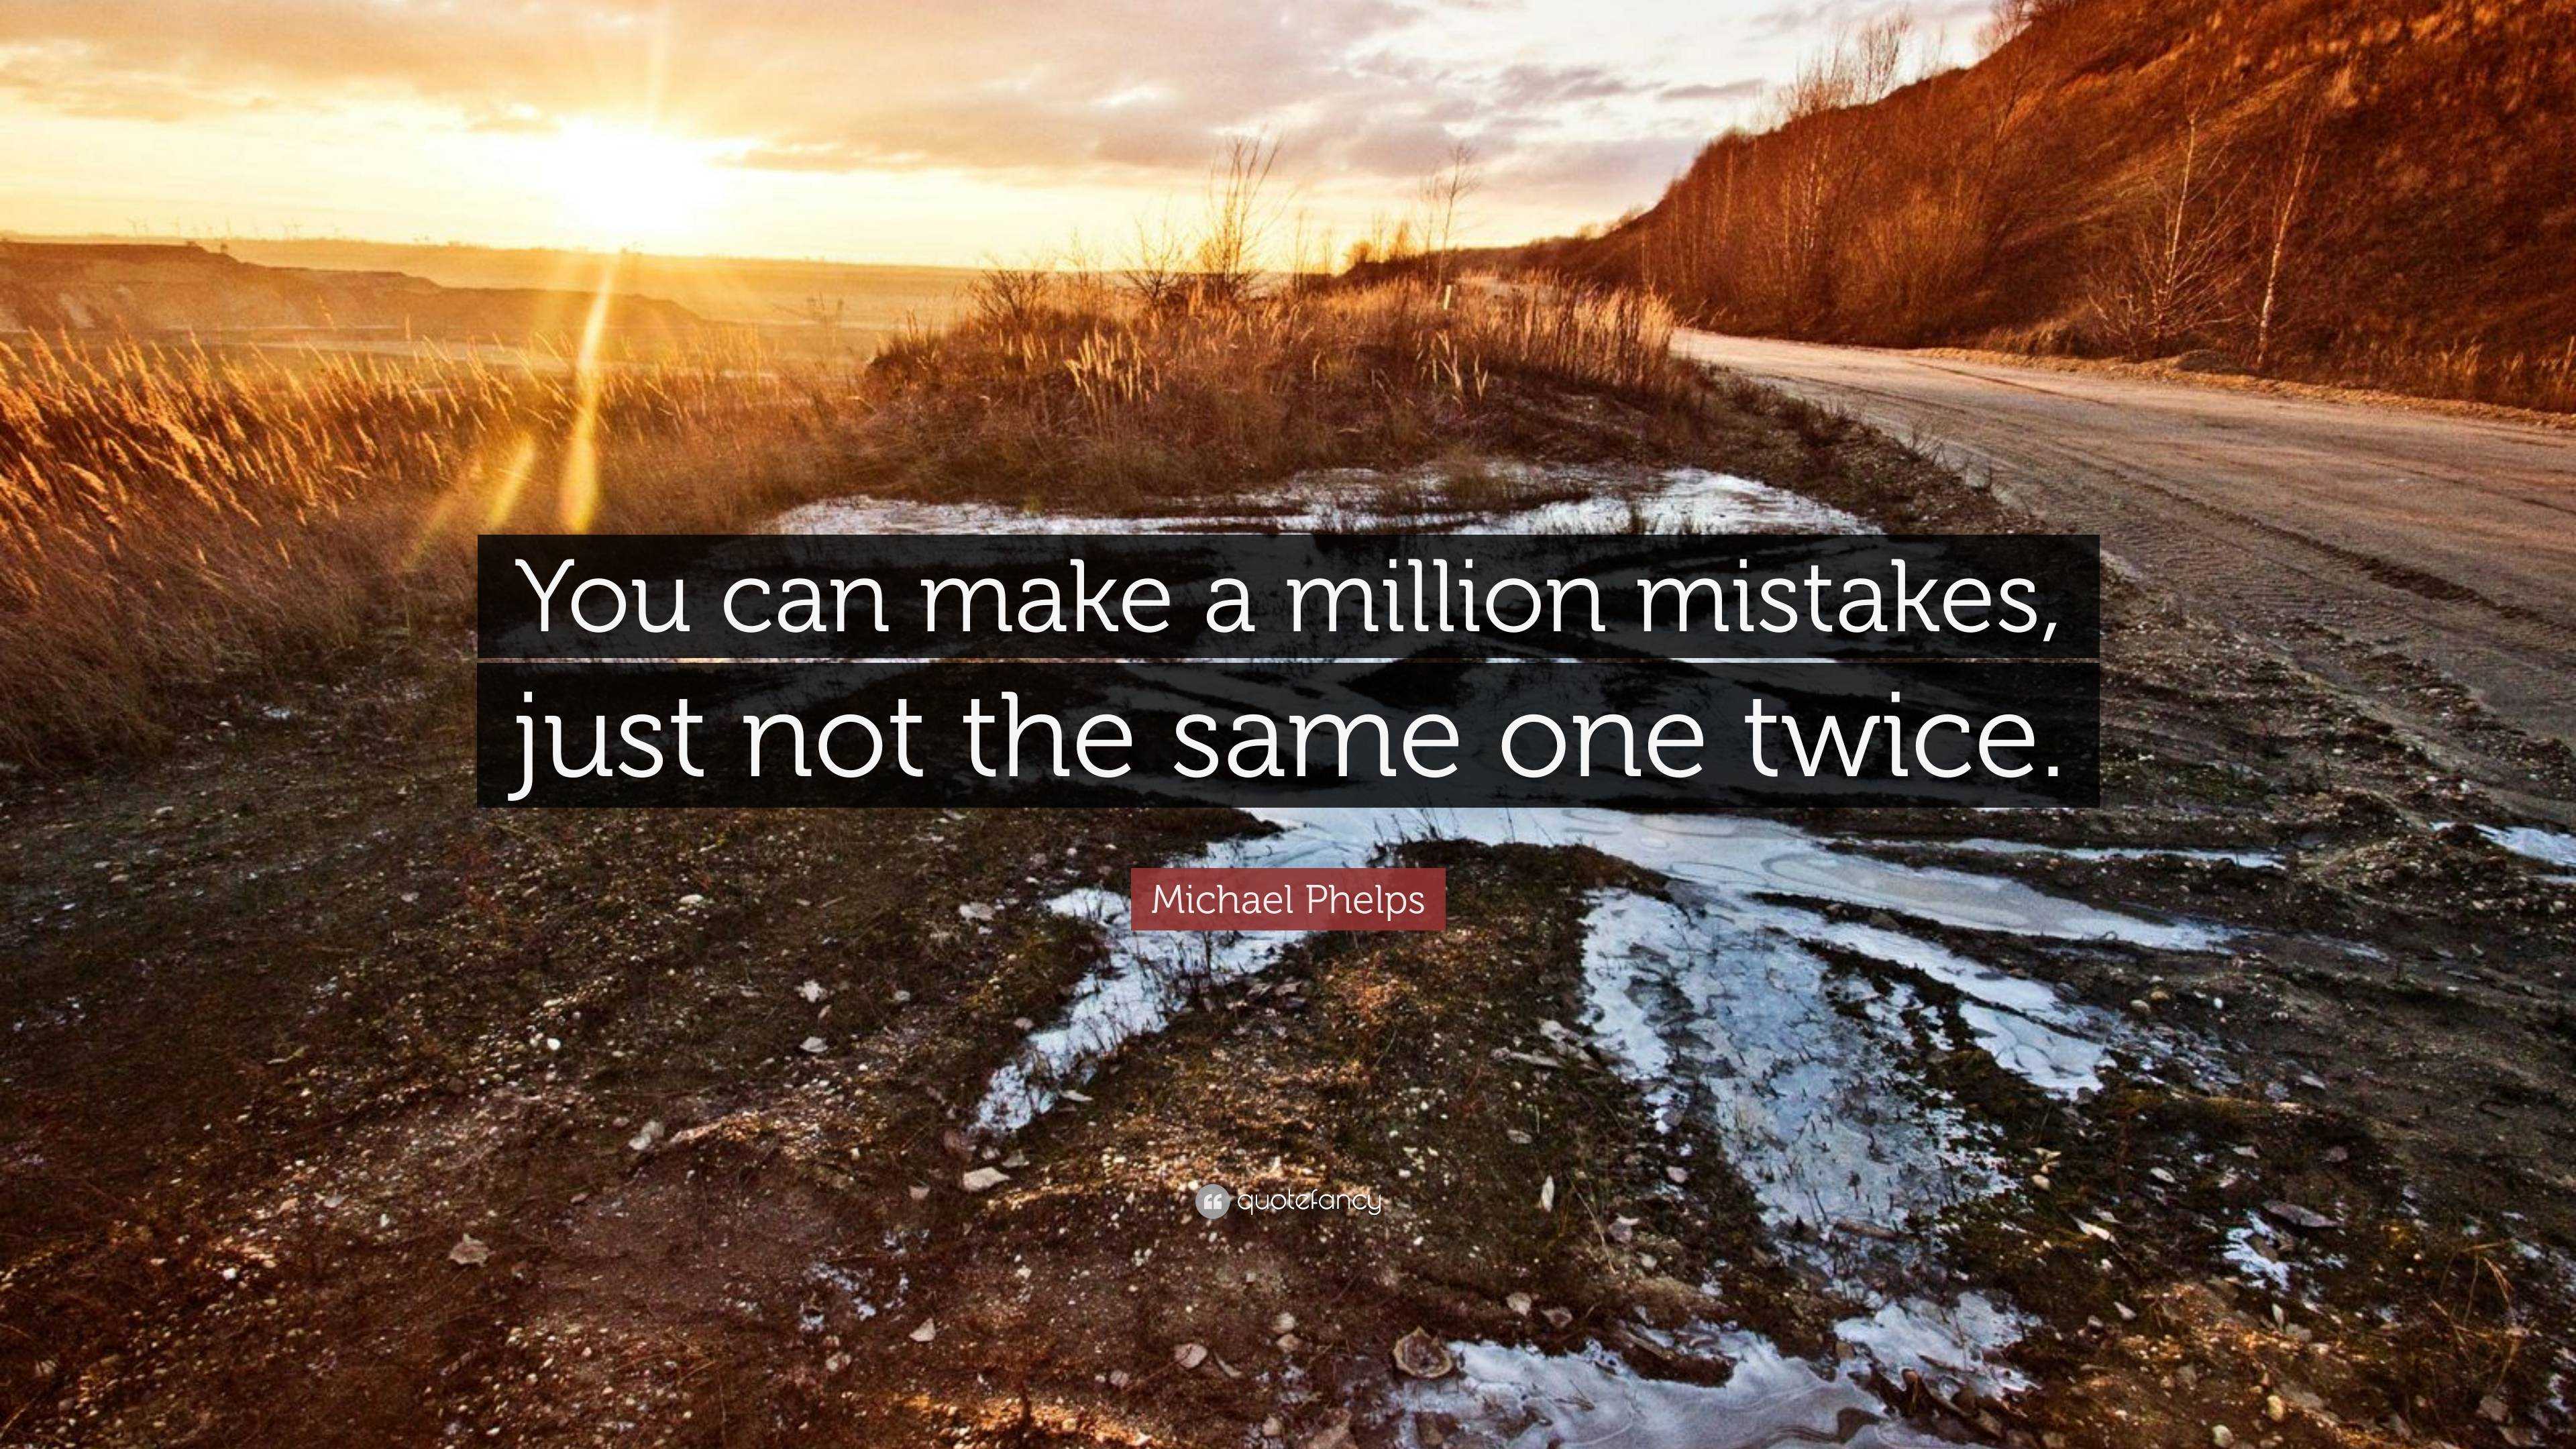 Michael Phelps Quote You Can Make A Million Mistakes Just Not The Same One Twice 2 Wallpapers Quotefancy